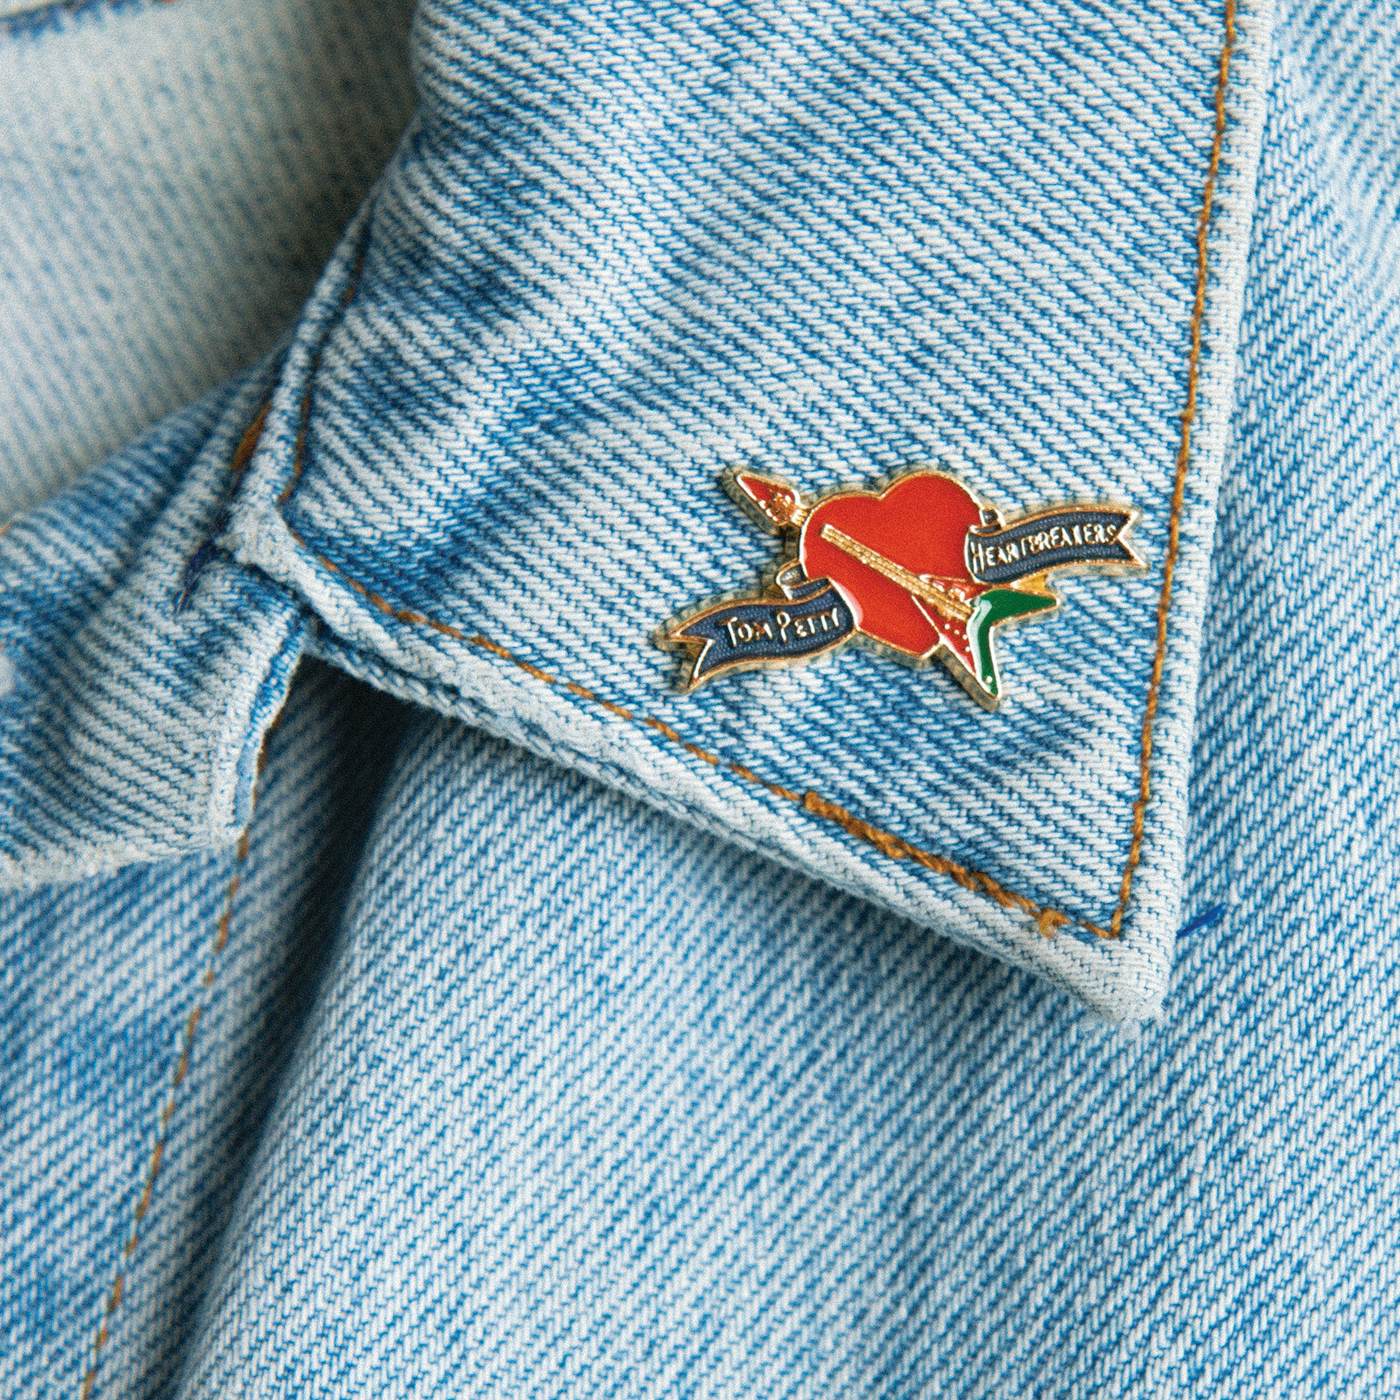 Tom Petty and the Heartbreakers Classic Logo Enamel Pin